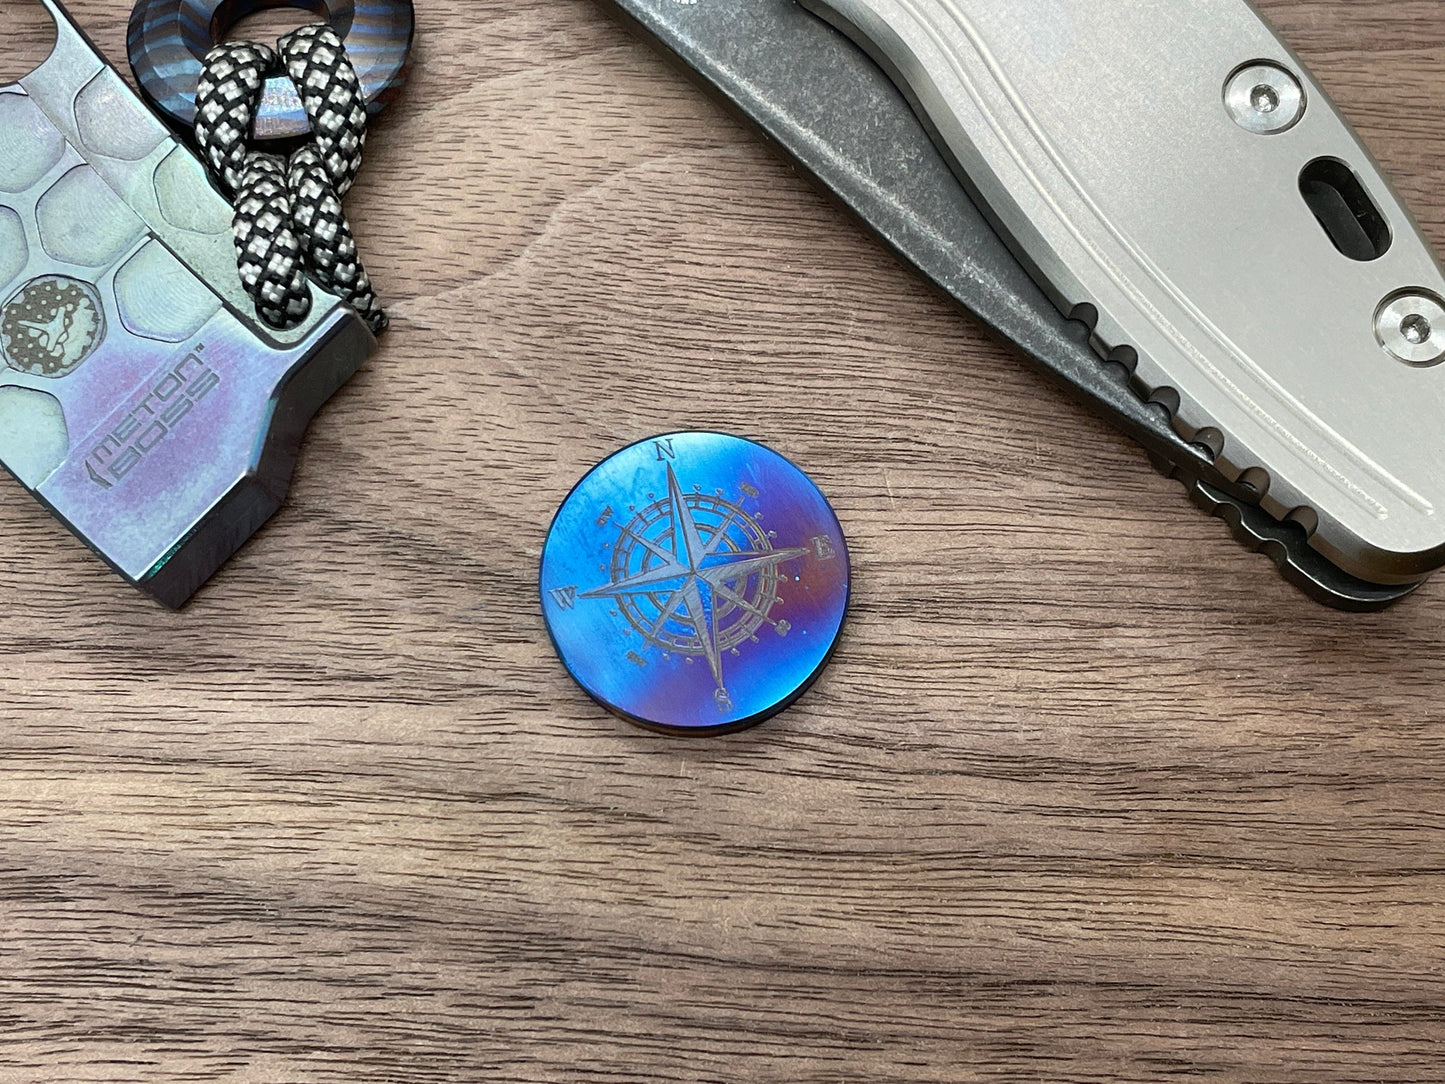 Flamed COMPASS Engraved Titanium Coin for Billetspin Gambit